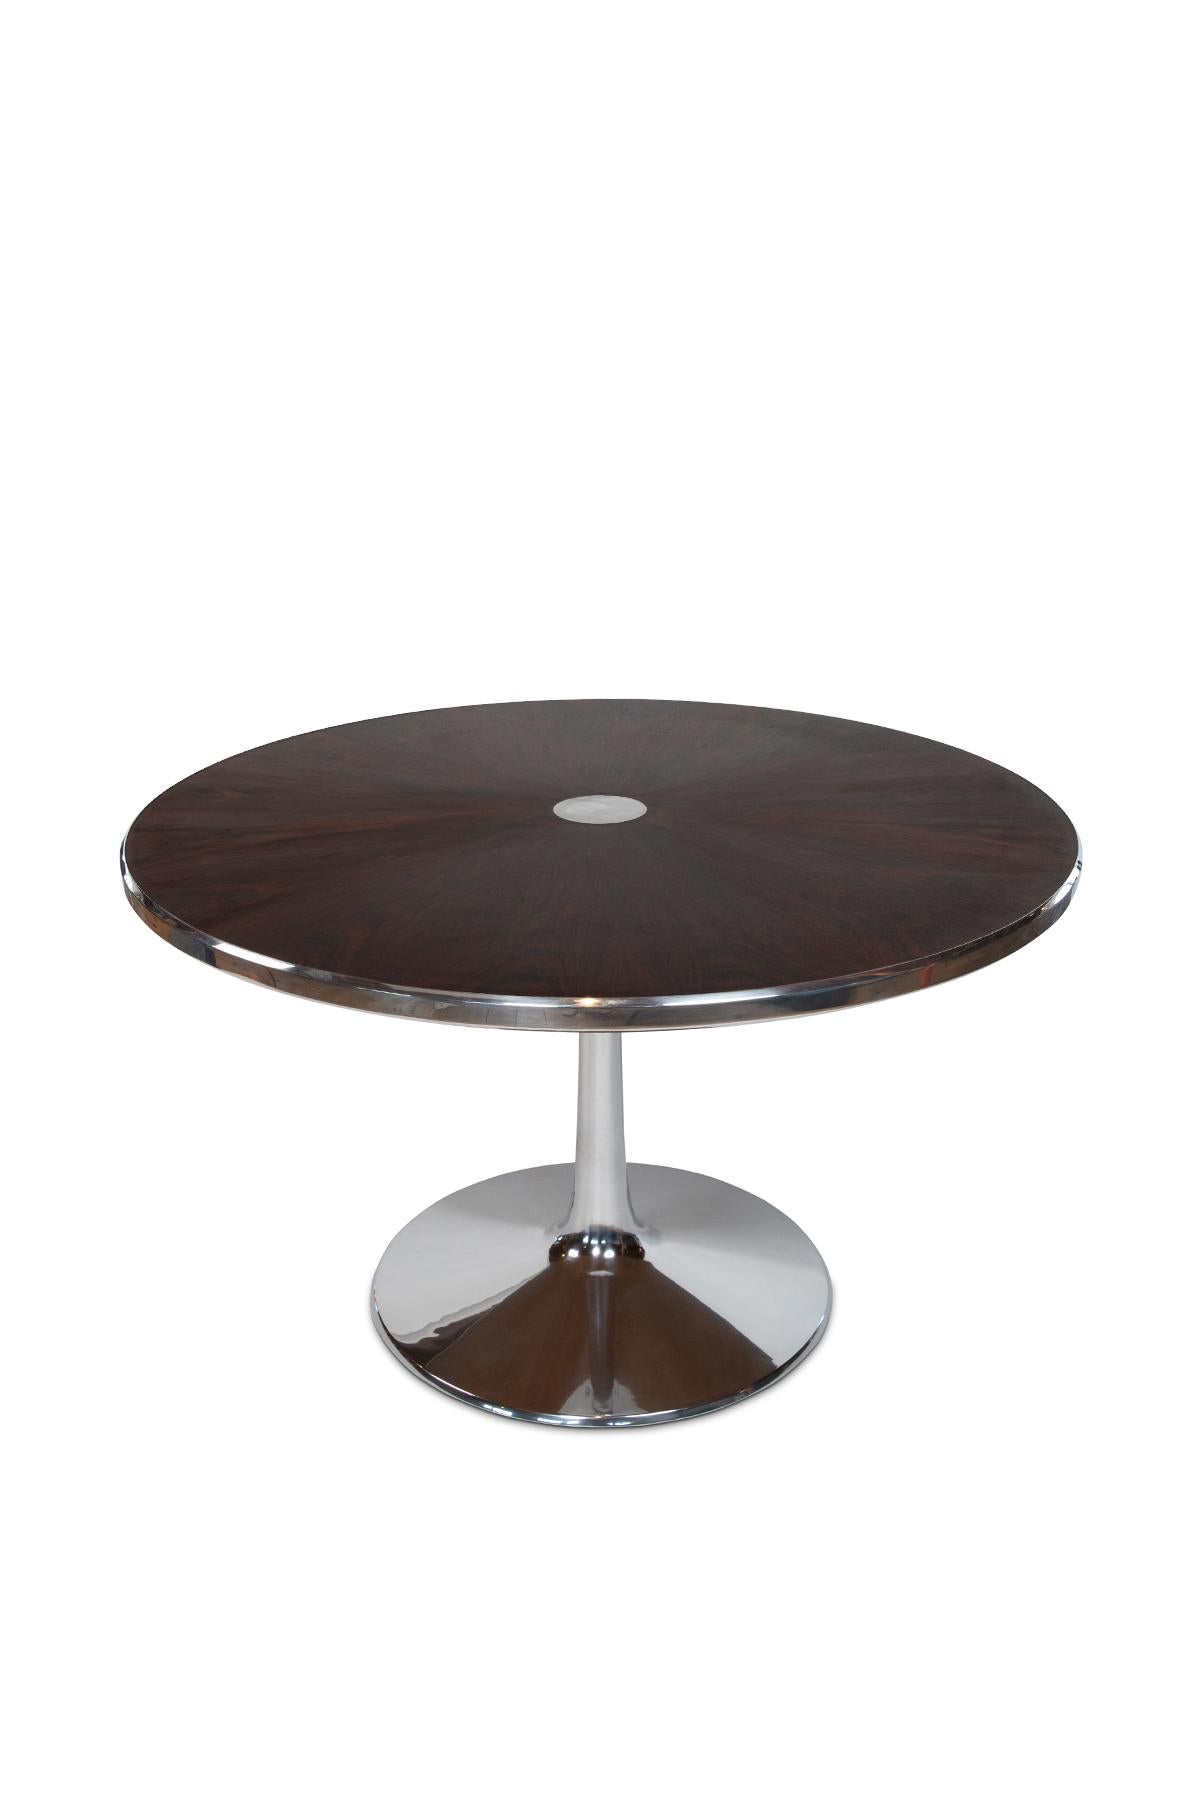 Rosewood and polished aluminum dining table by Cado circa late 1960s. This example has stunning book matched rosewood that has been newly finished and the tulip base and trim have been polished.


